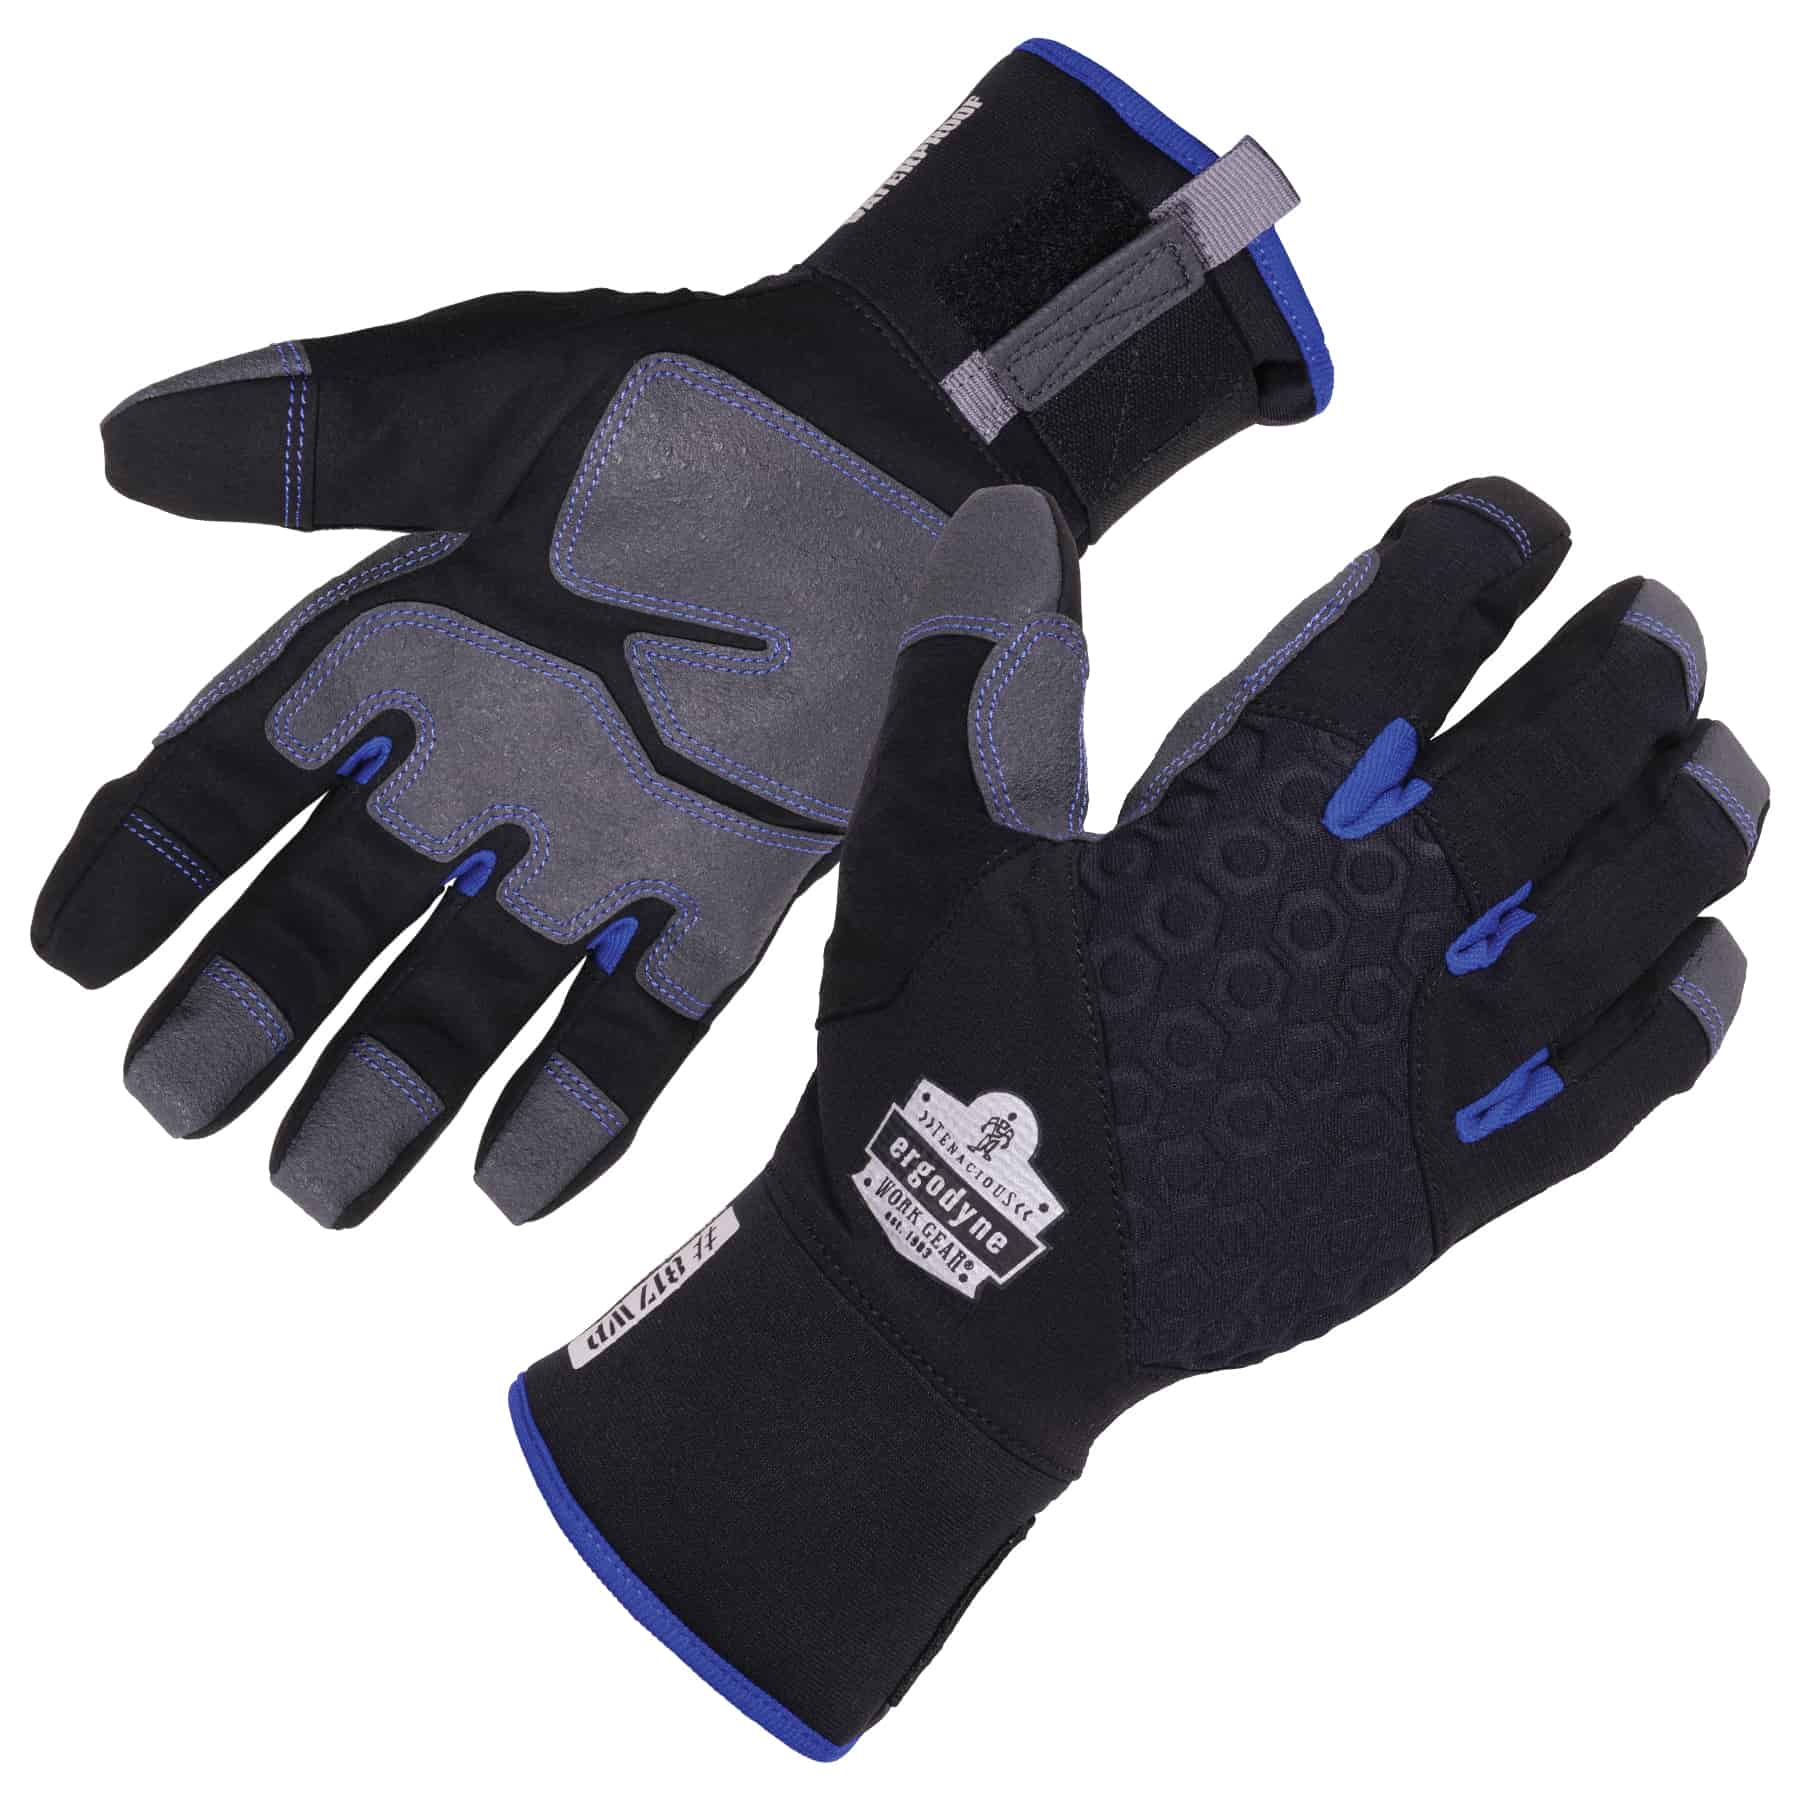 PROFLEX 817WP THERMAL WATERPROOF GLOVES - Cold-Resistant Gloves